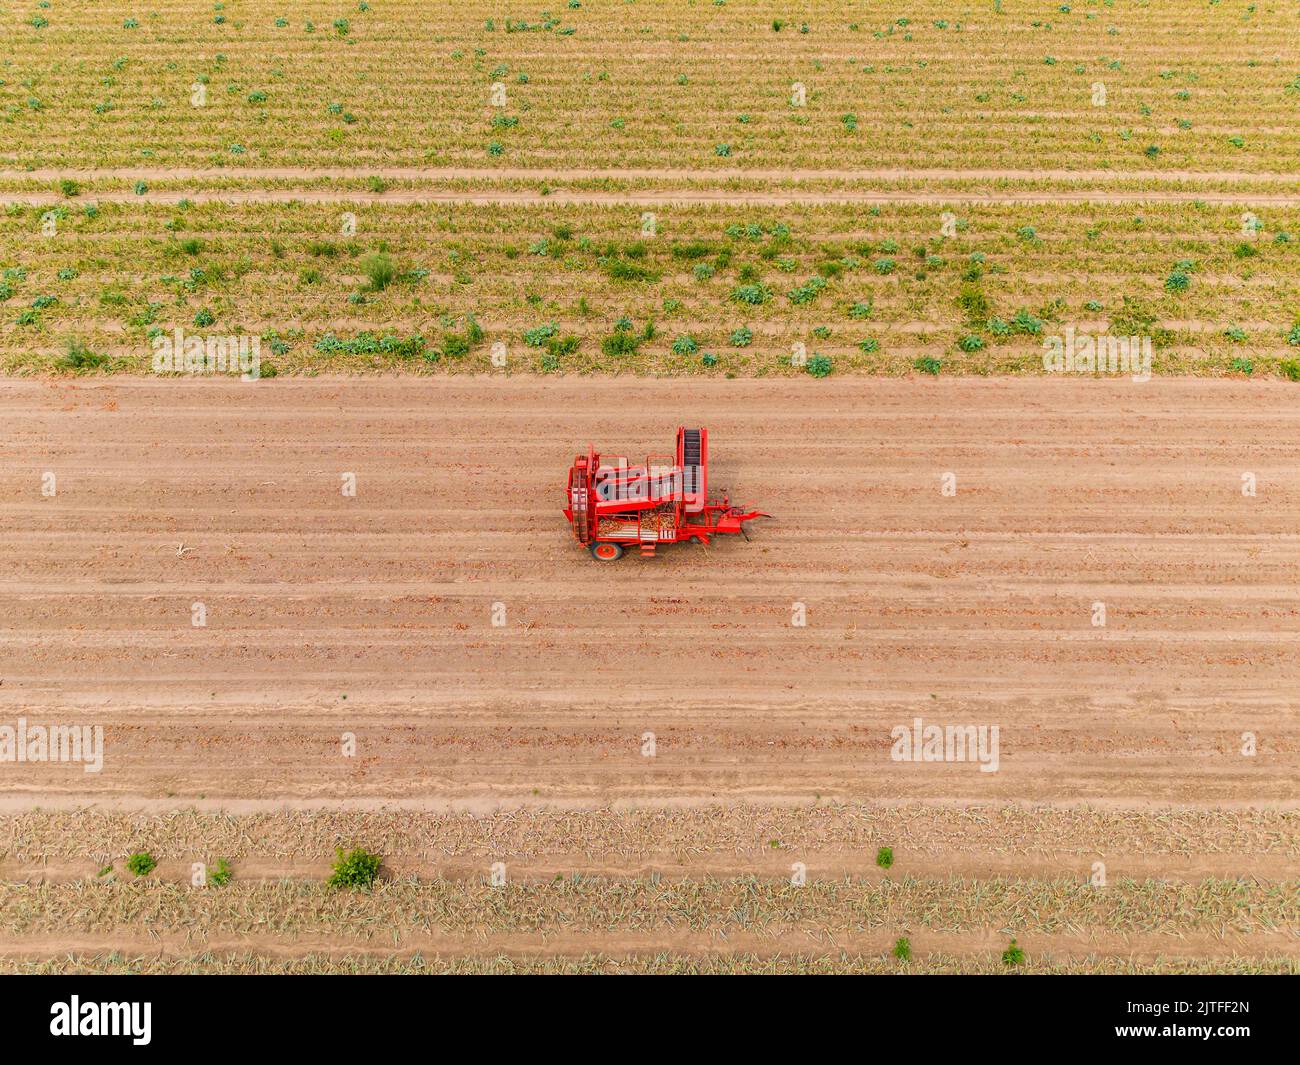 A red harvester on a dry field after harvest, Hesse, Germany Stock Photo